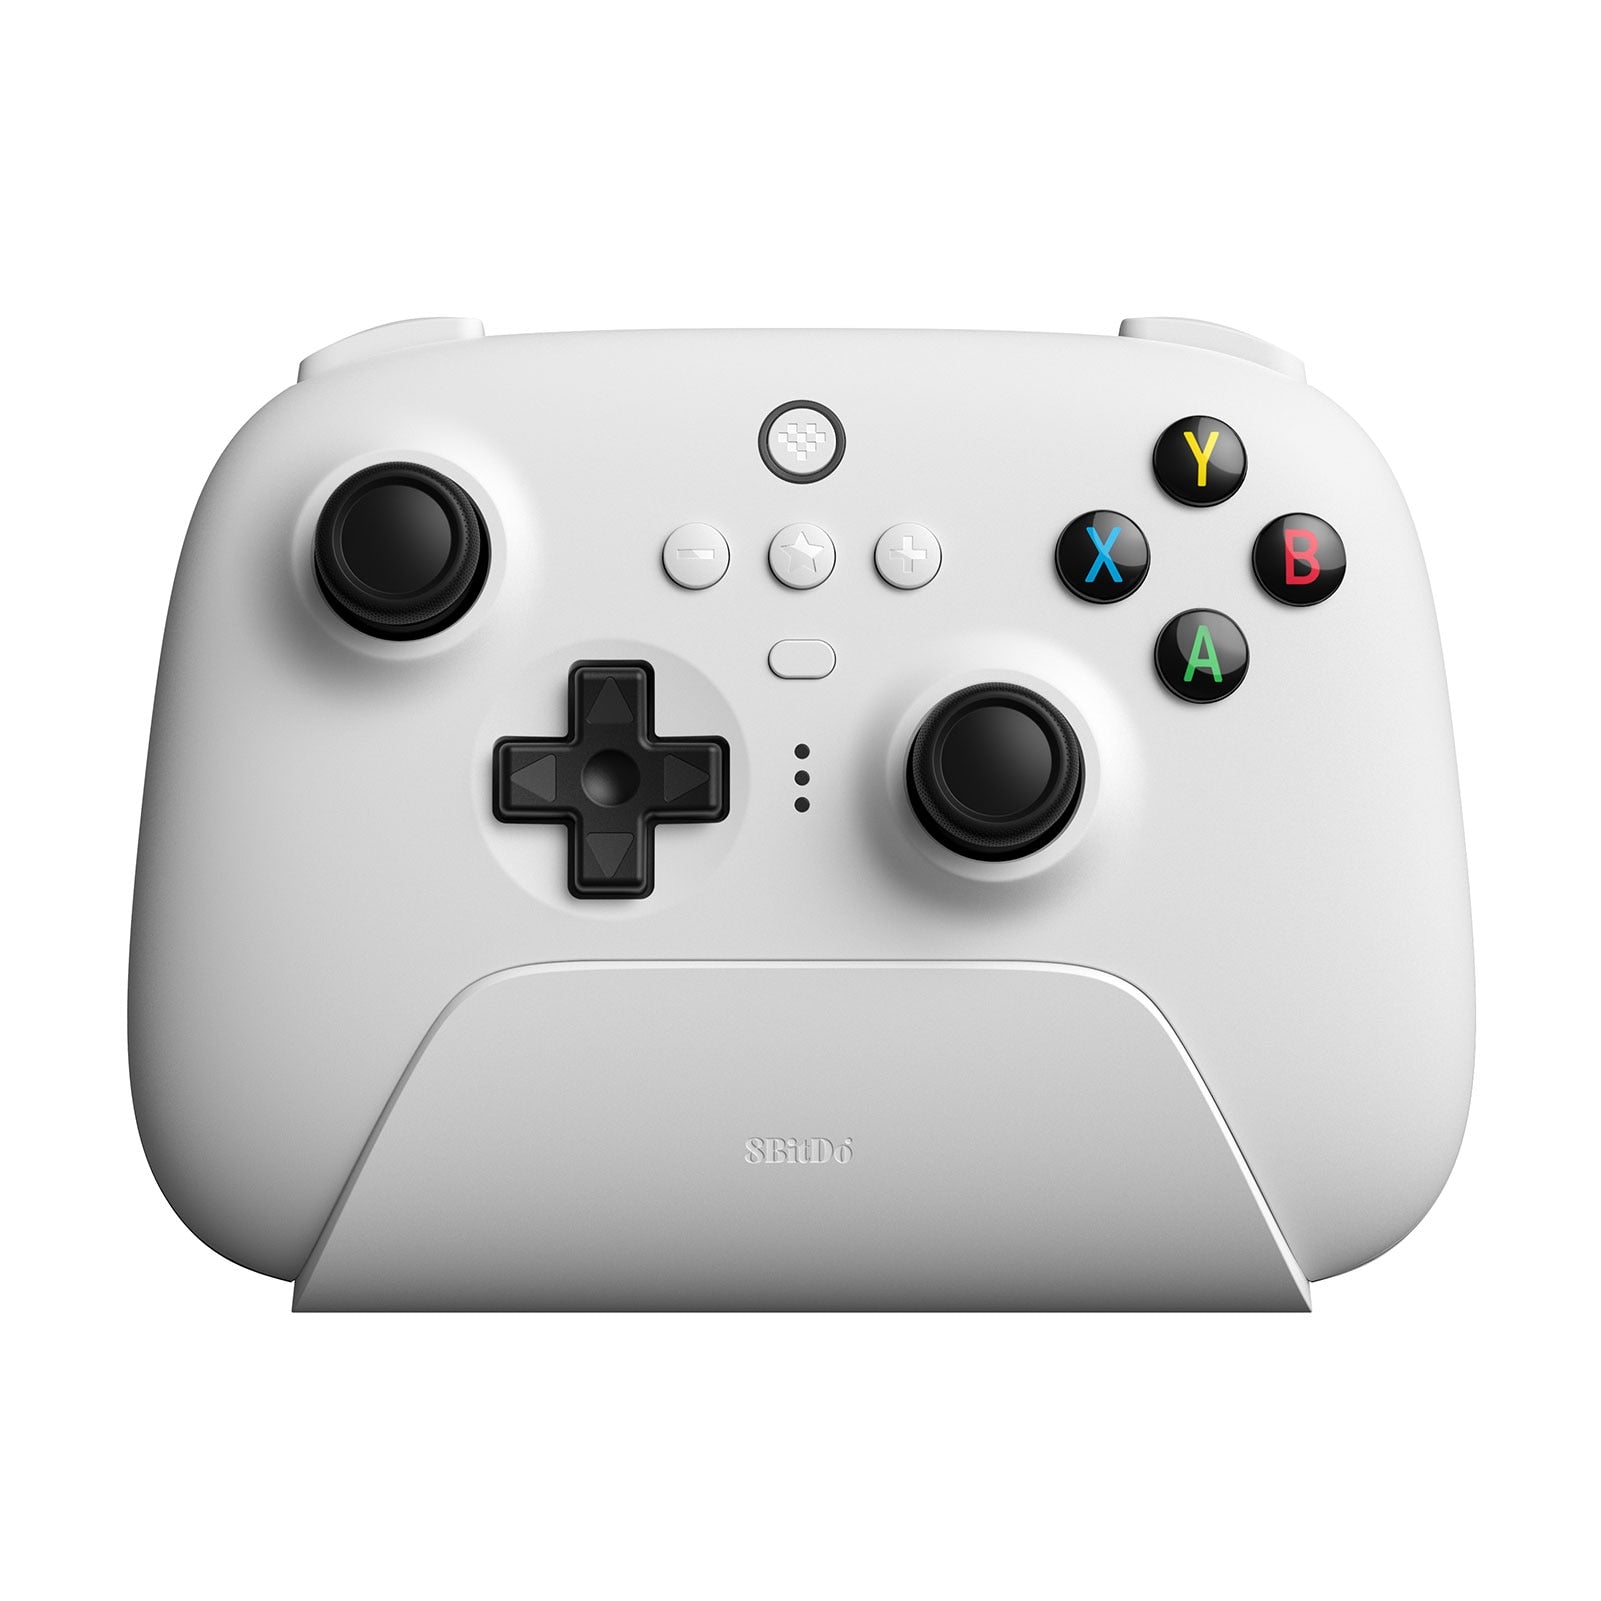 8BitDo - Ultimate Wireless 2.4G Gaming Controller with Charging Dock for PC, Windows 10, 11, Steam Deck, Android White